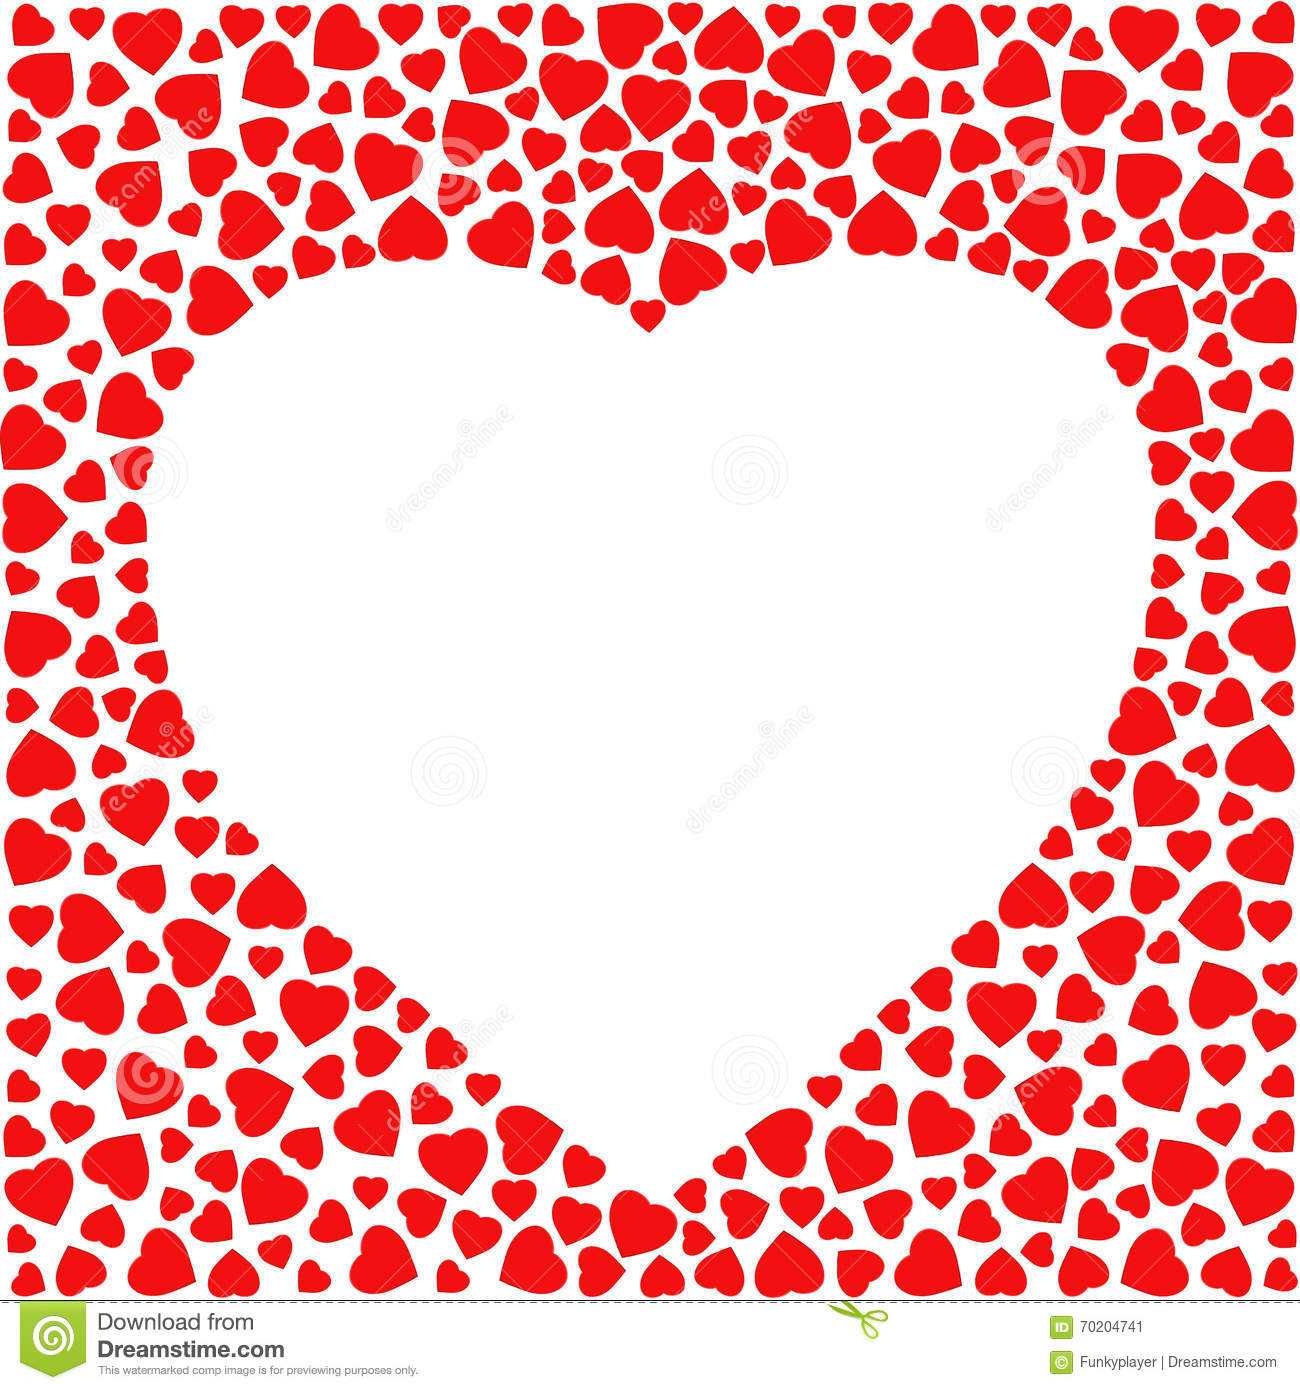 Border With Red Hearts. Greeting Card Design Template Regarding Small Greeting Card Template